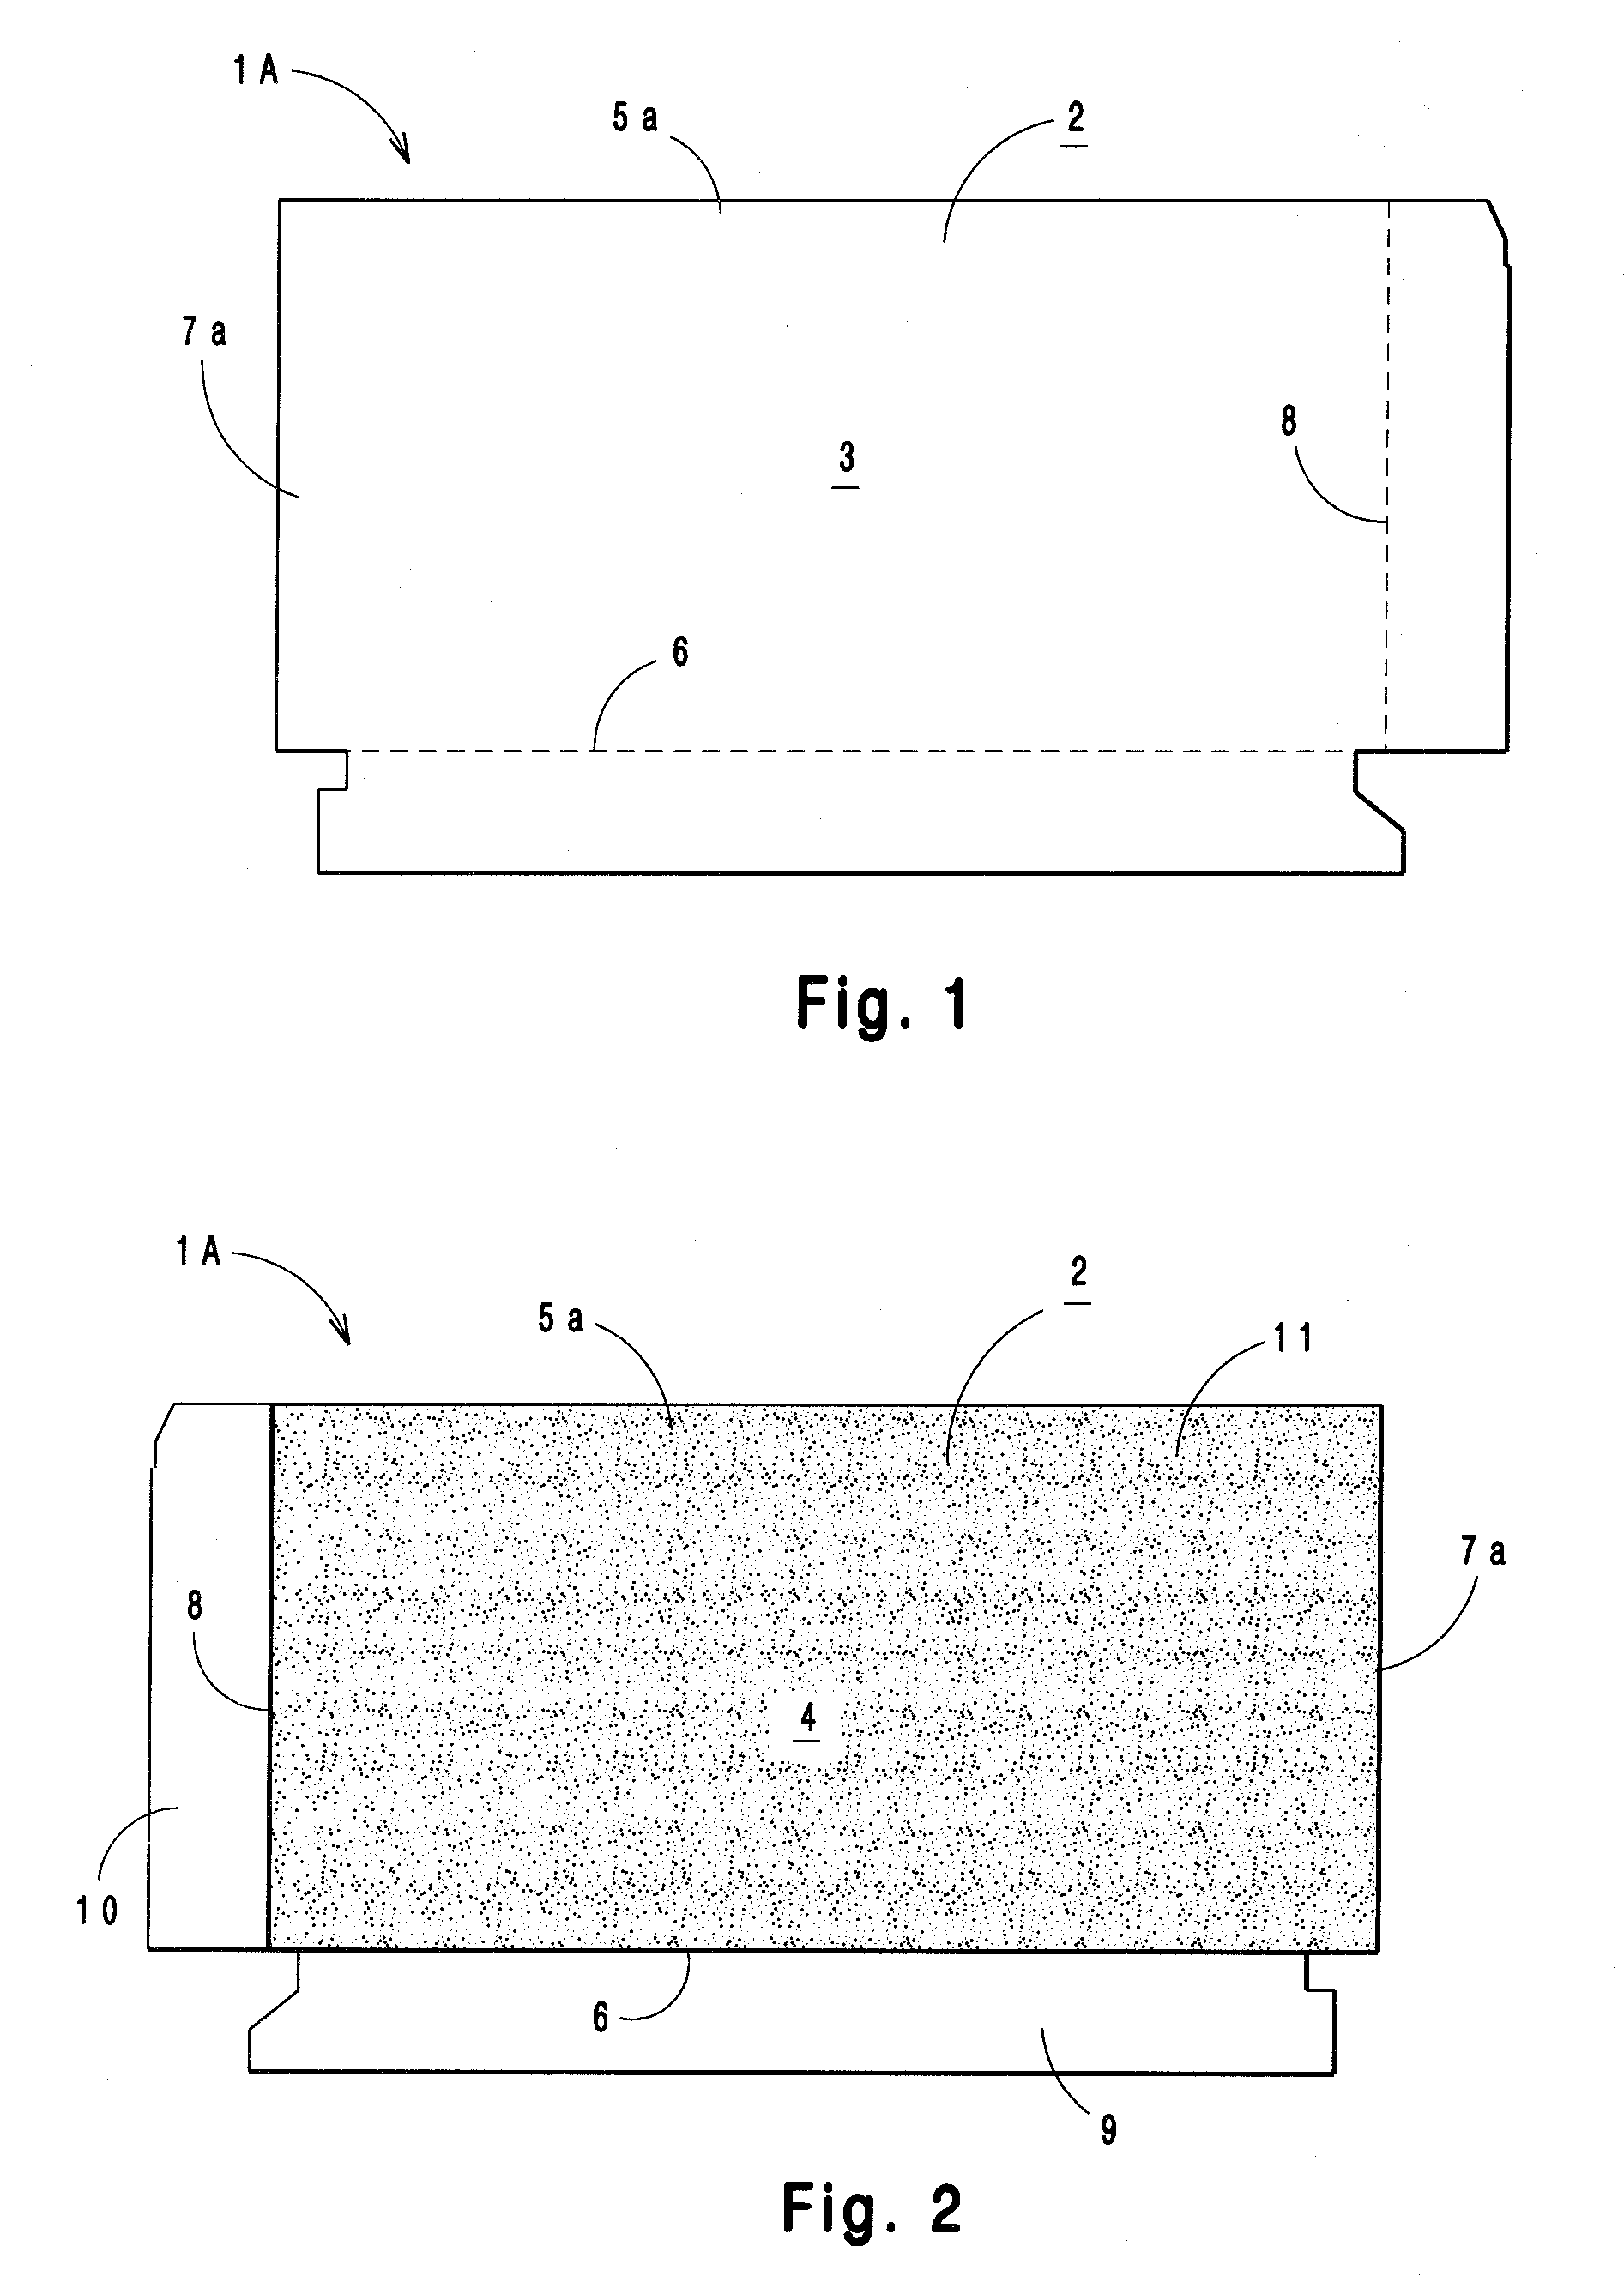 Metal roofing shingle, metal roofing shingle system, and method of installing